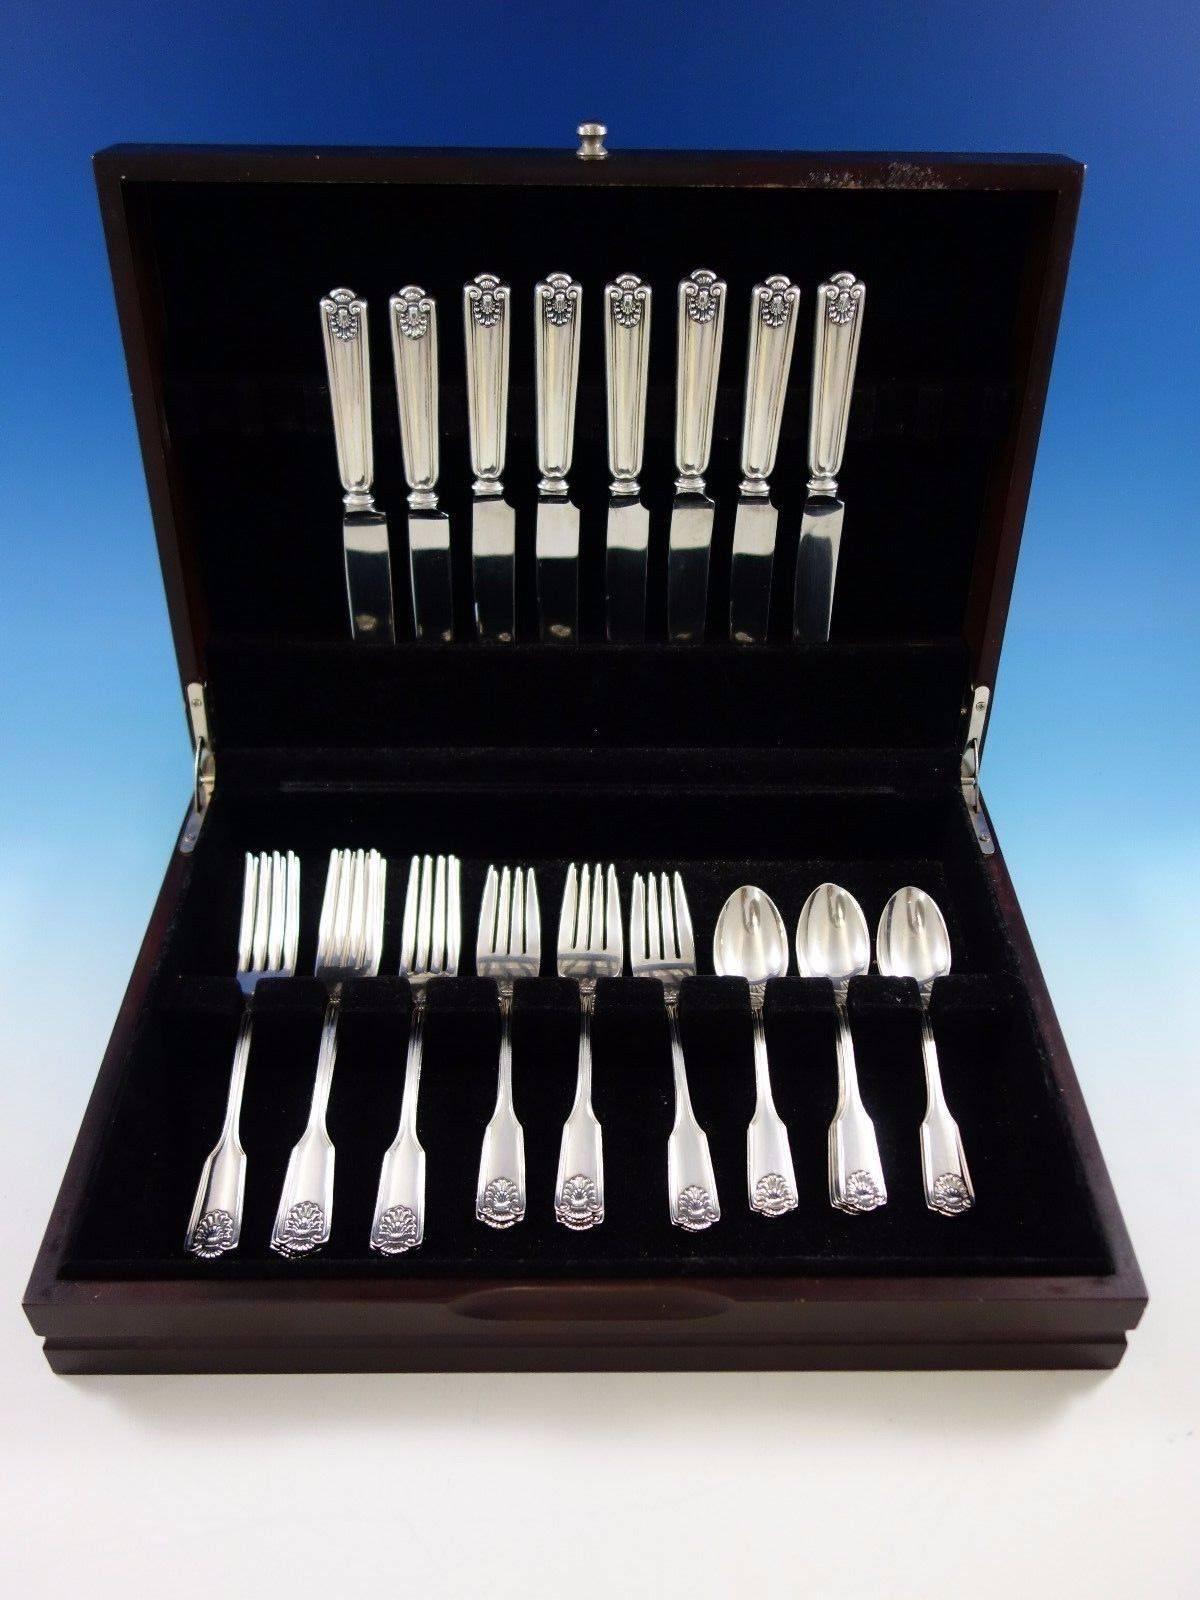 Fiddle shell by frank smith sterling silver flatware set, 32 pieces. This set includes: 

Eight knives, 8 1/2